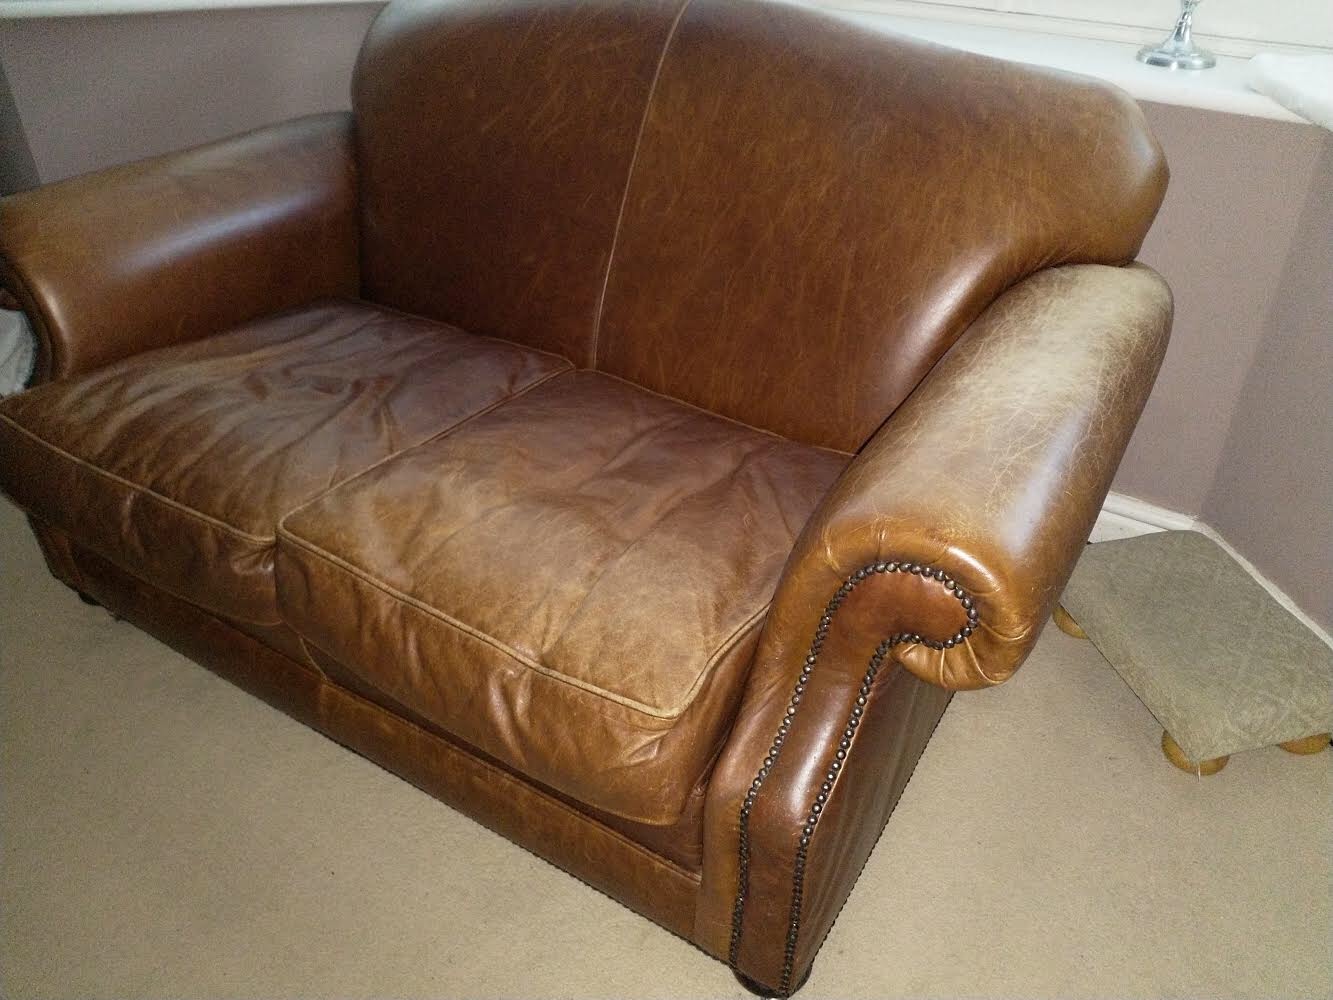 Fading Leather Pro Rers, How To Fix Faded Leather Furniture